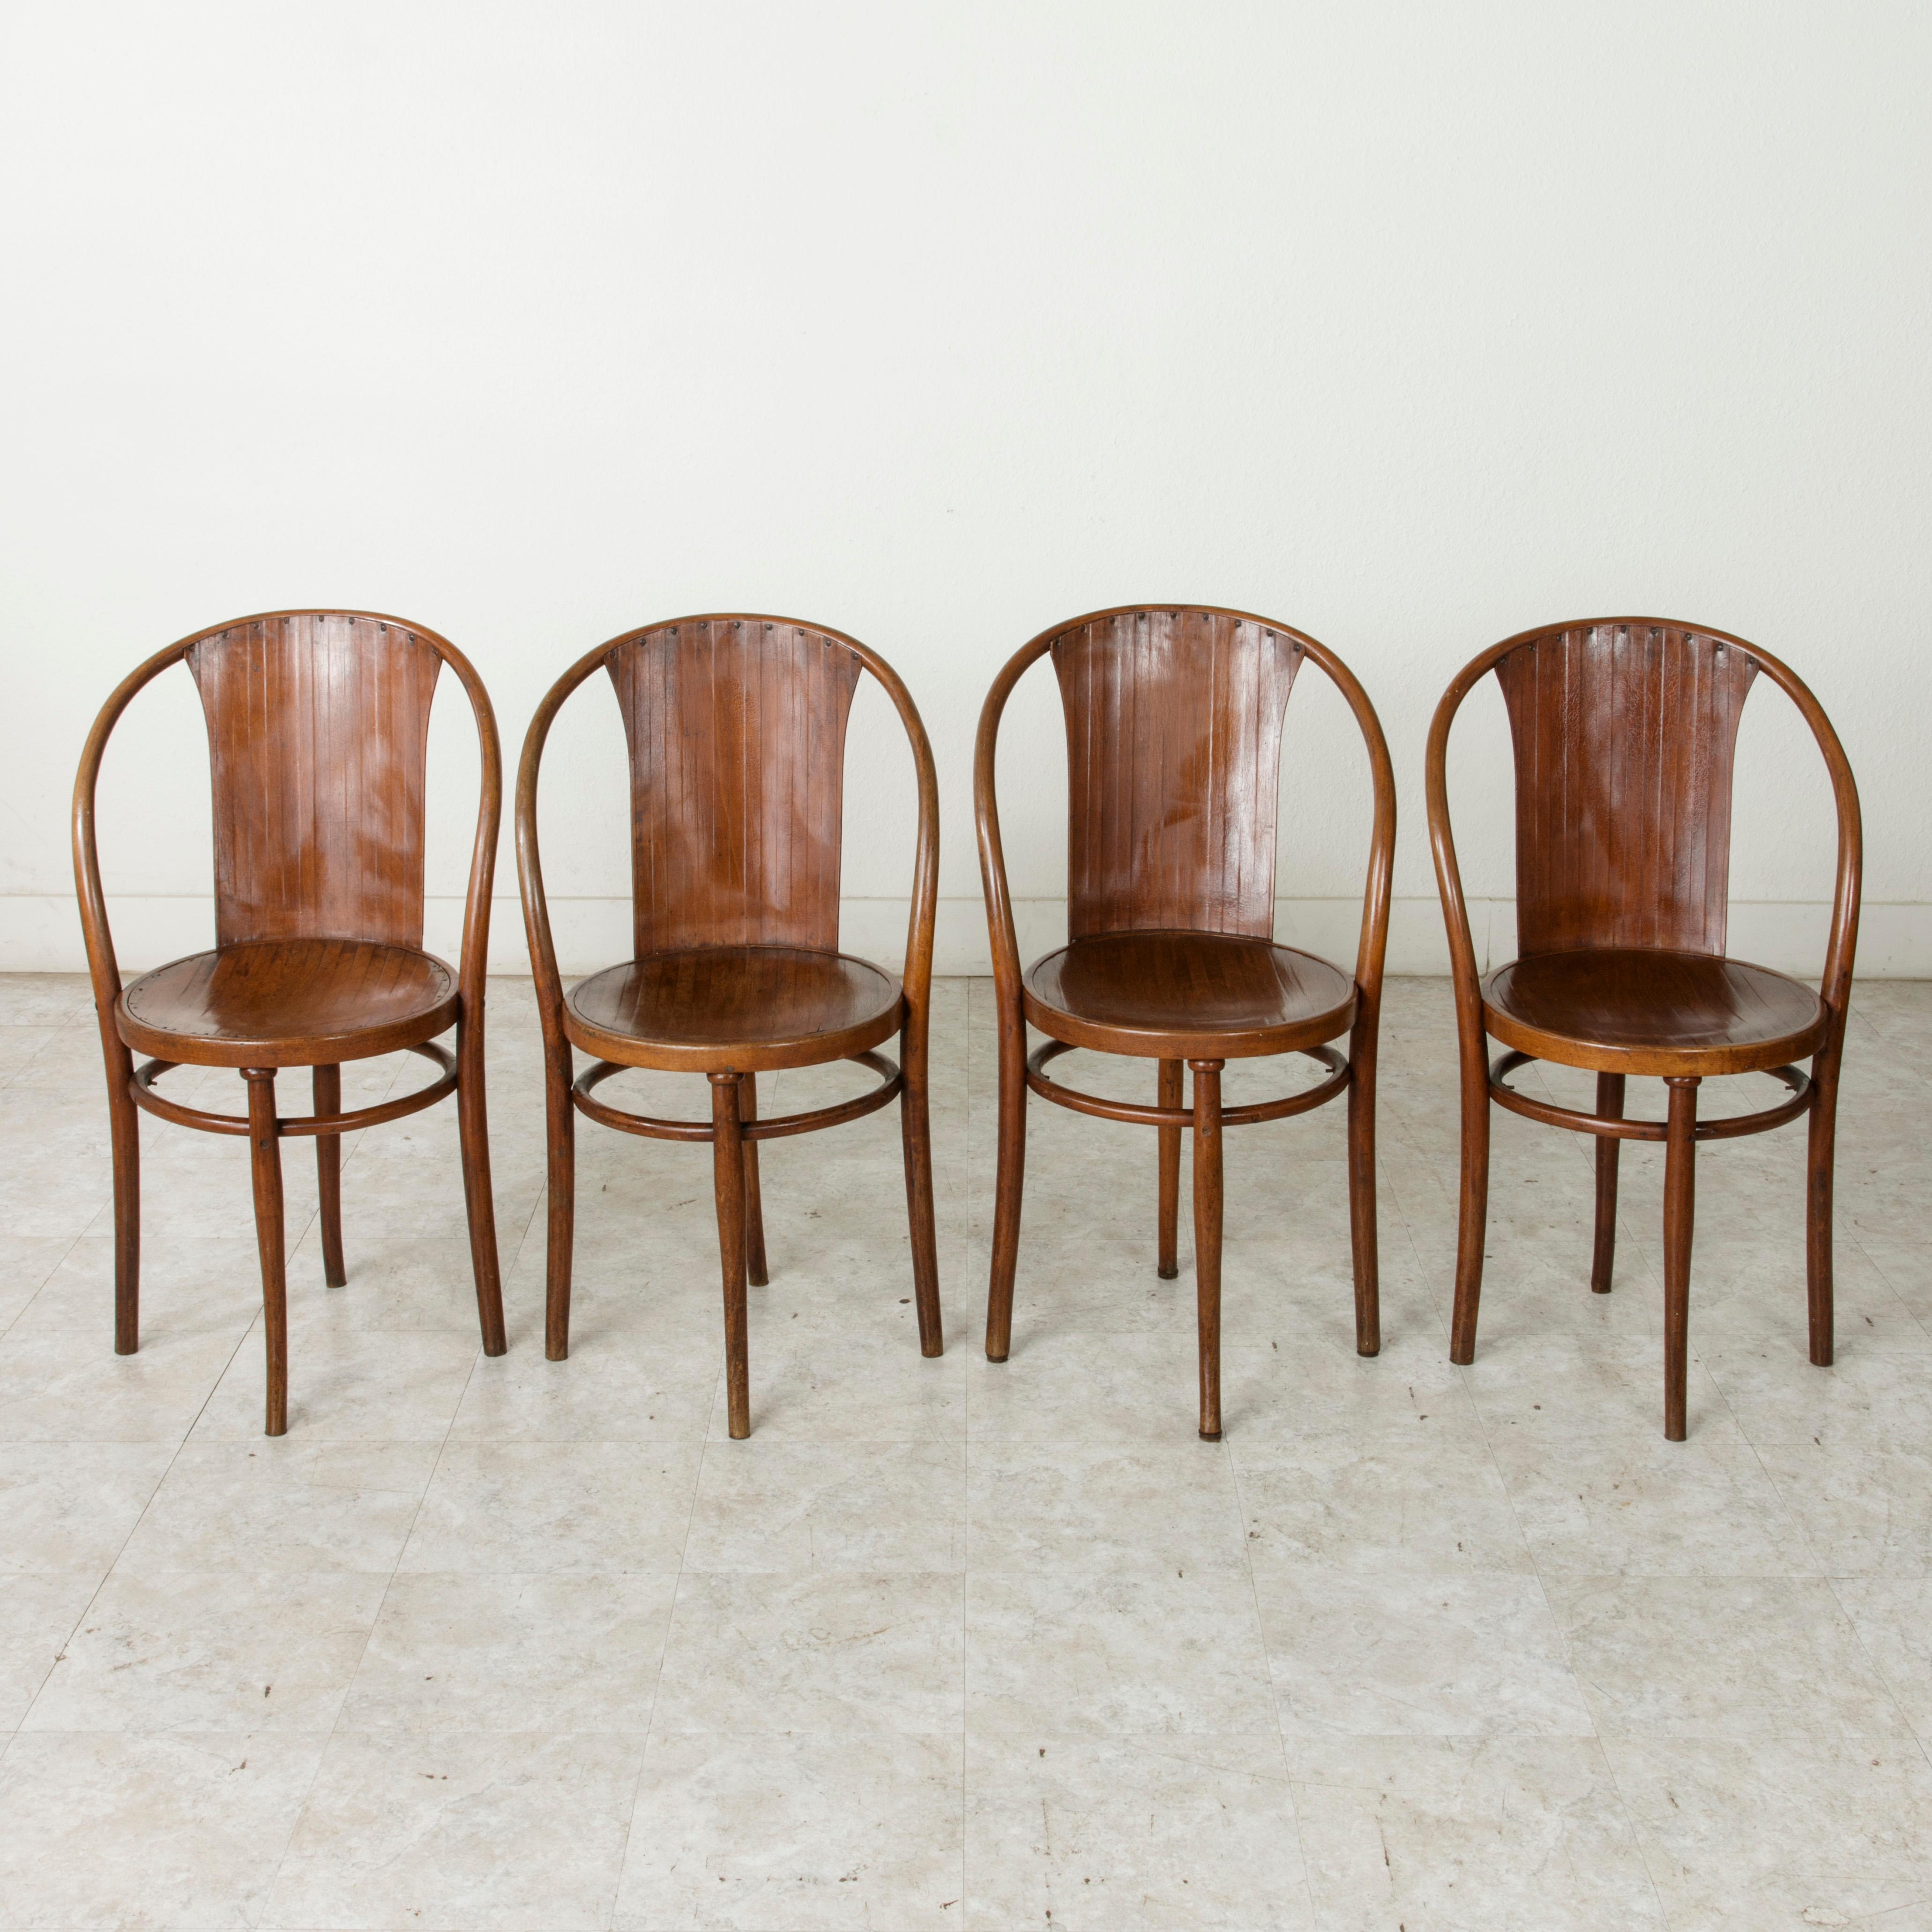 This set of four early 20th century Austrian Art Deco bentwood bistro chairs are marked Jacob and Josef Kohn on the bottoms. The Kohn father and son duo were contemporaries of designer Thonet, who also specialized in bentwood furniture. Founding